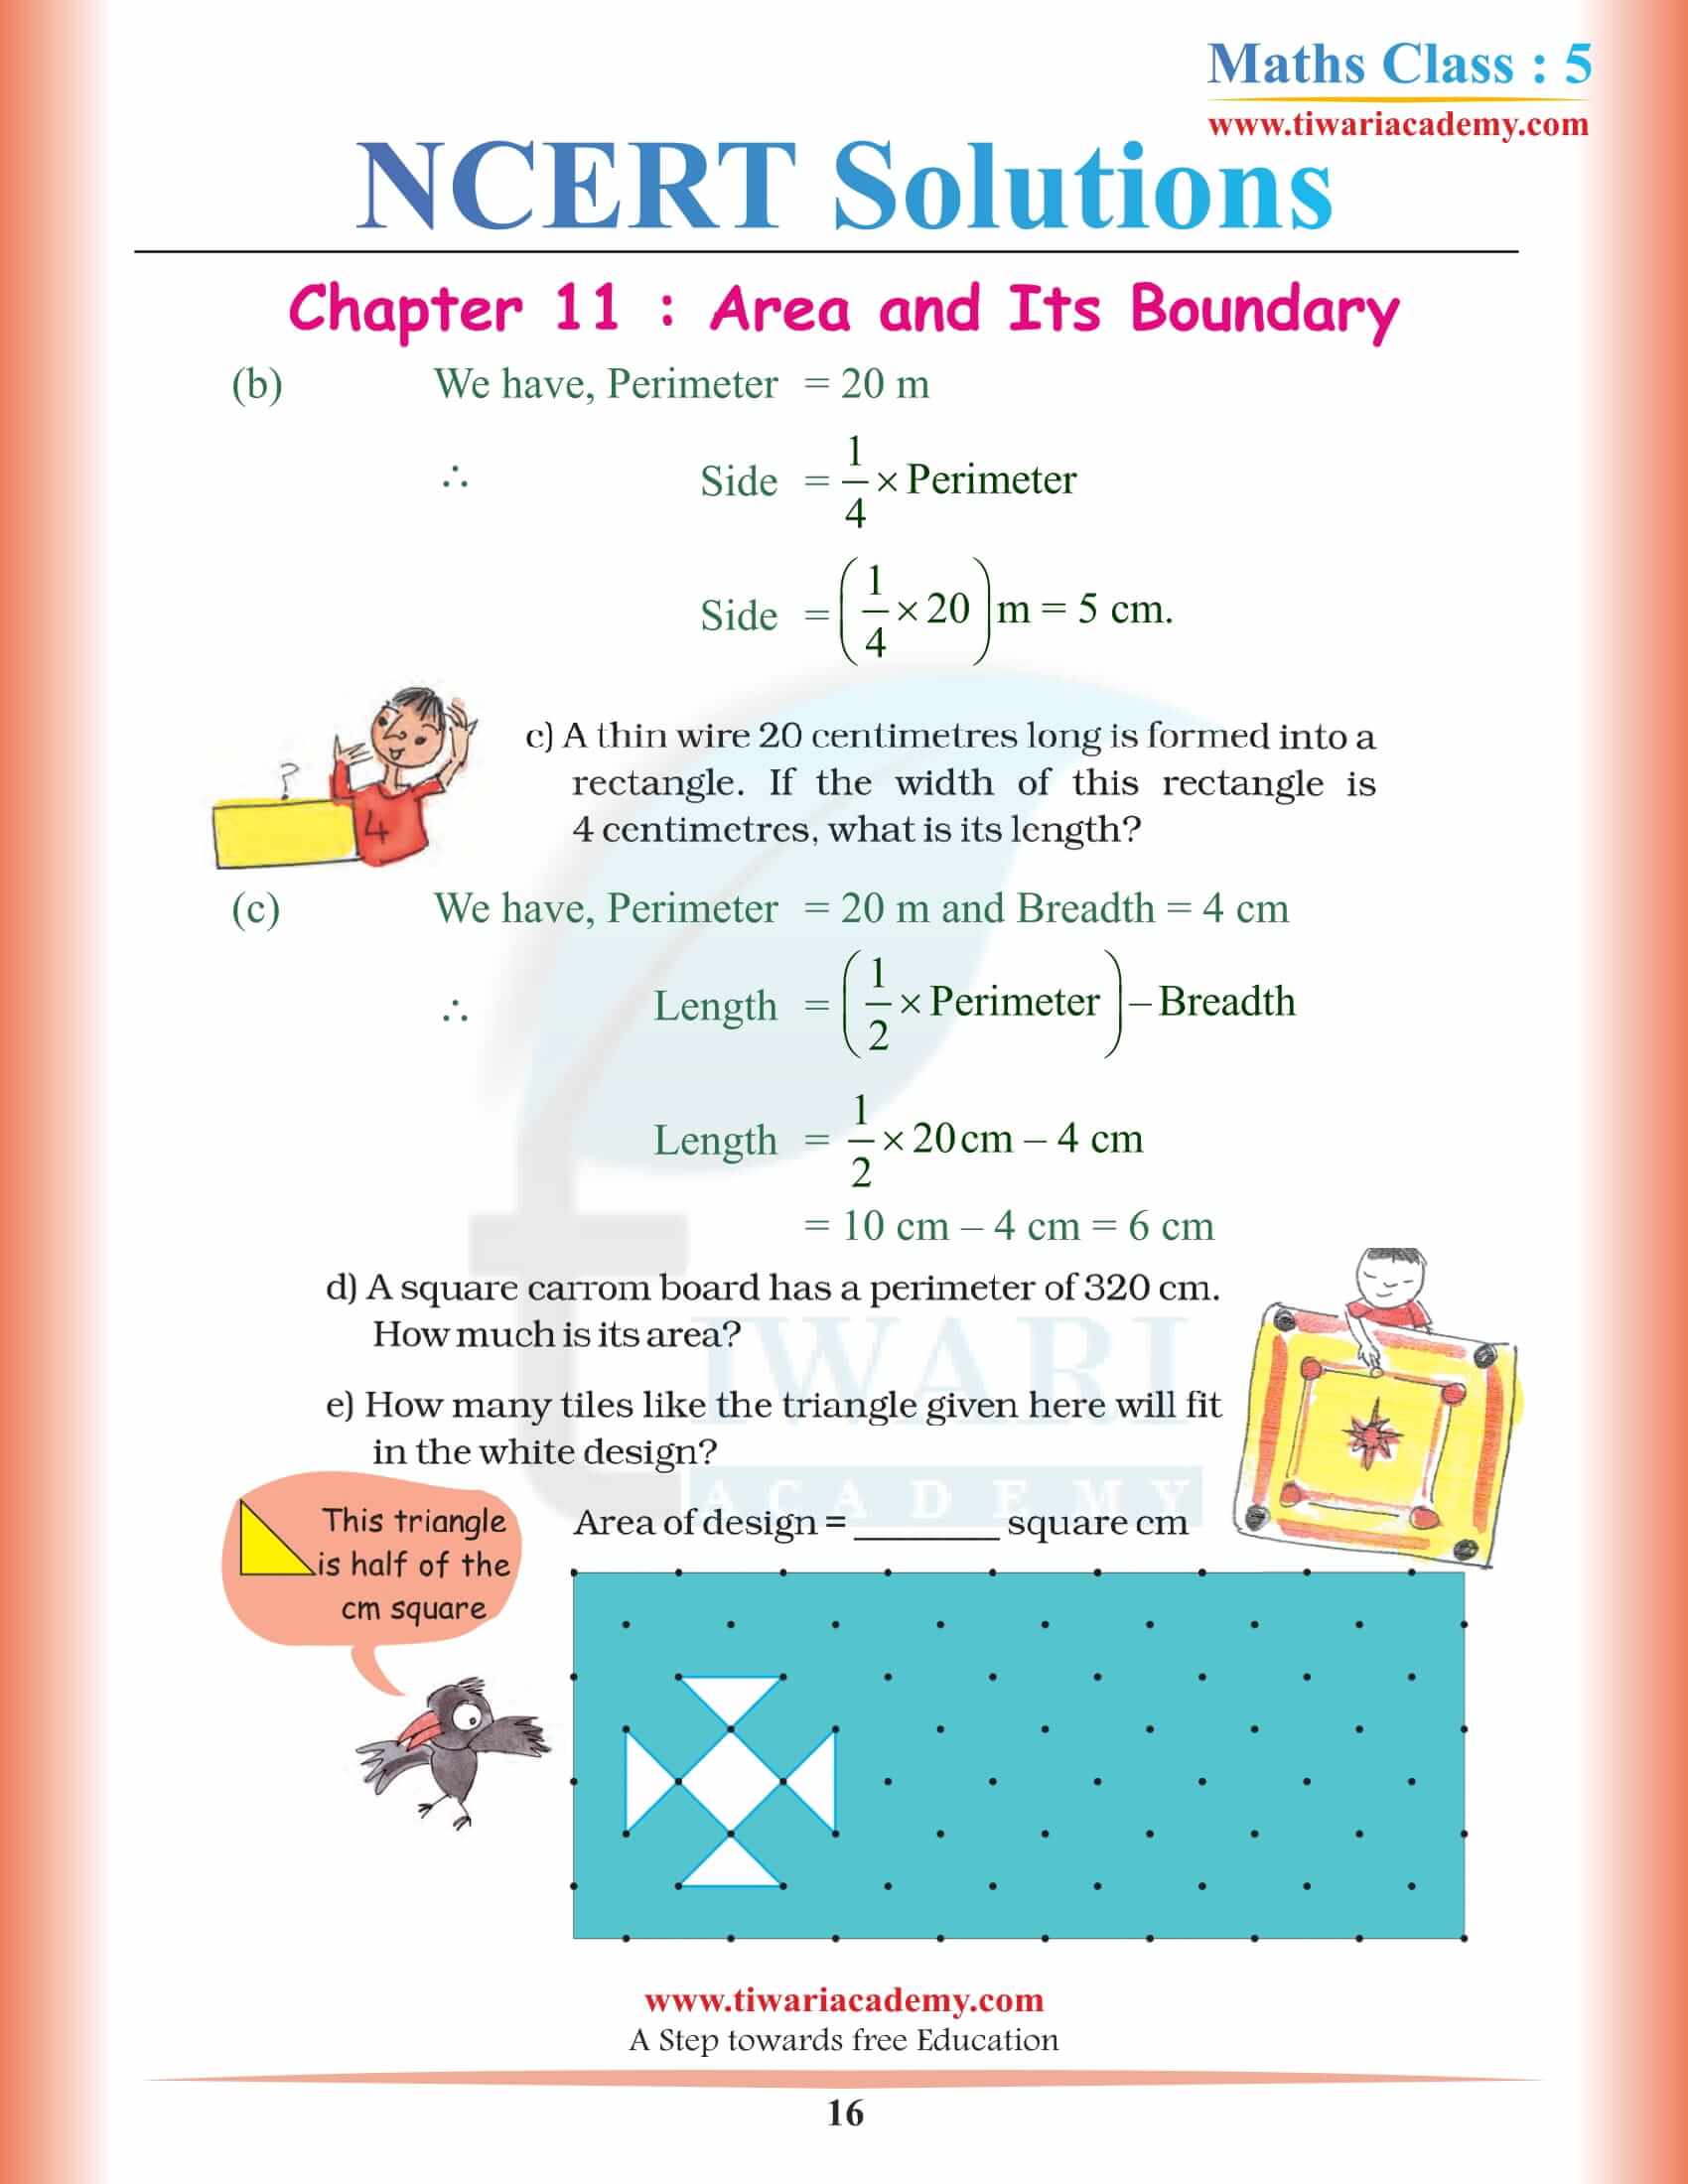 NCERT Solutions for Class 5 Maths Chapter 11 Free Download